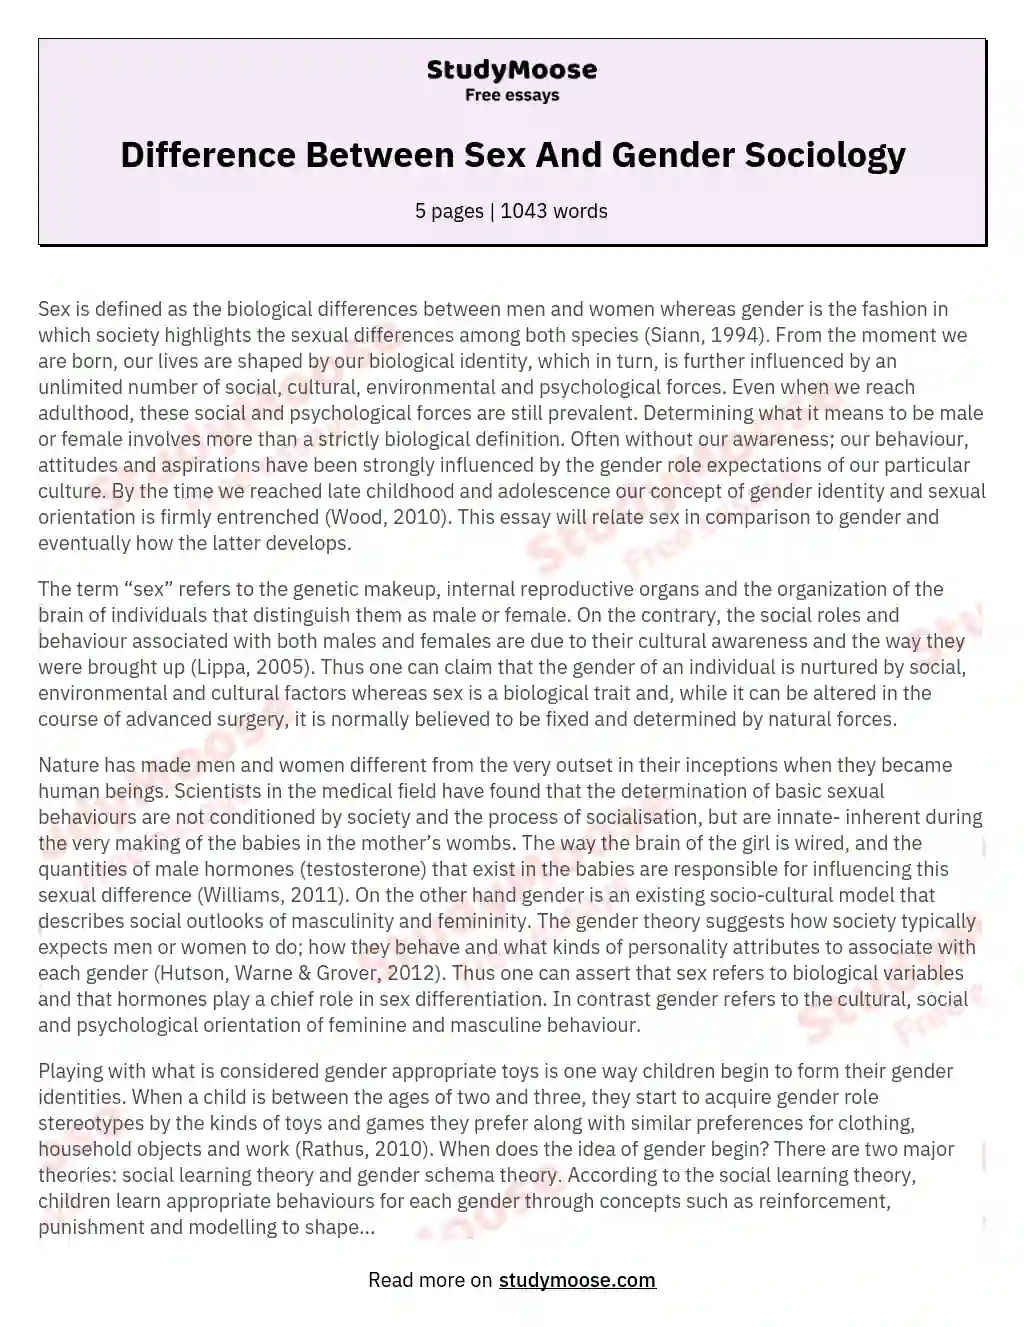 Difference Between Sex And Gender Sociology essay